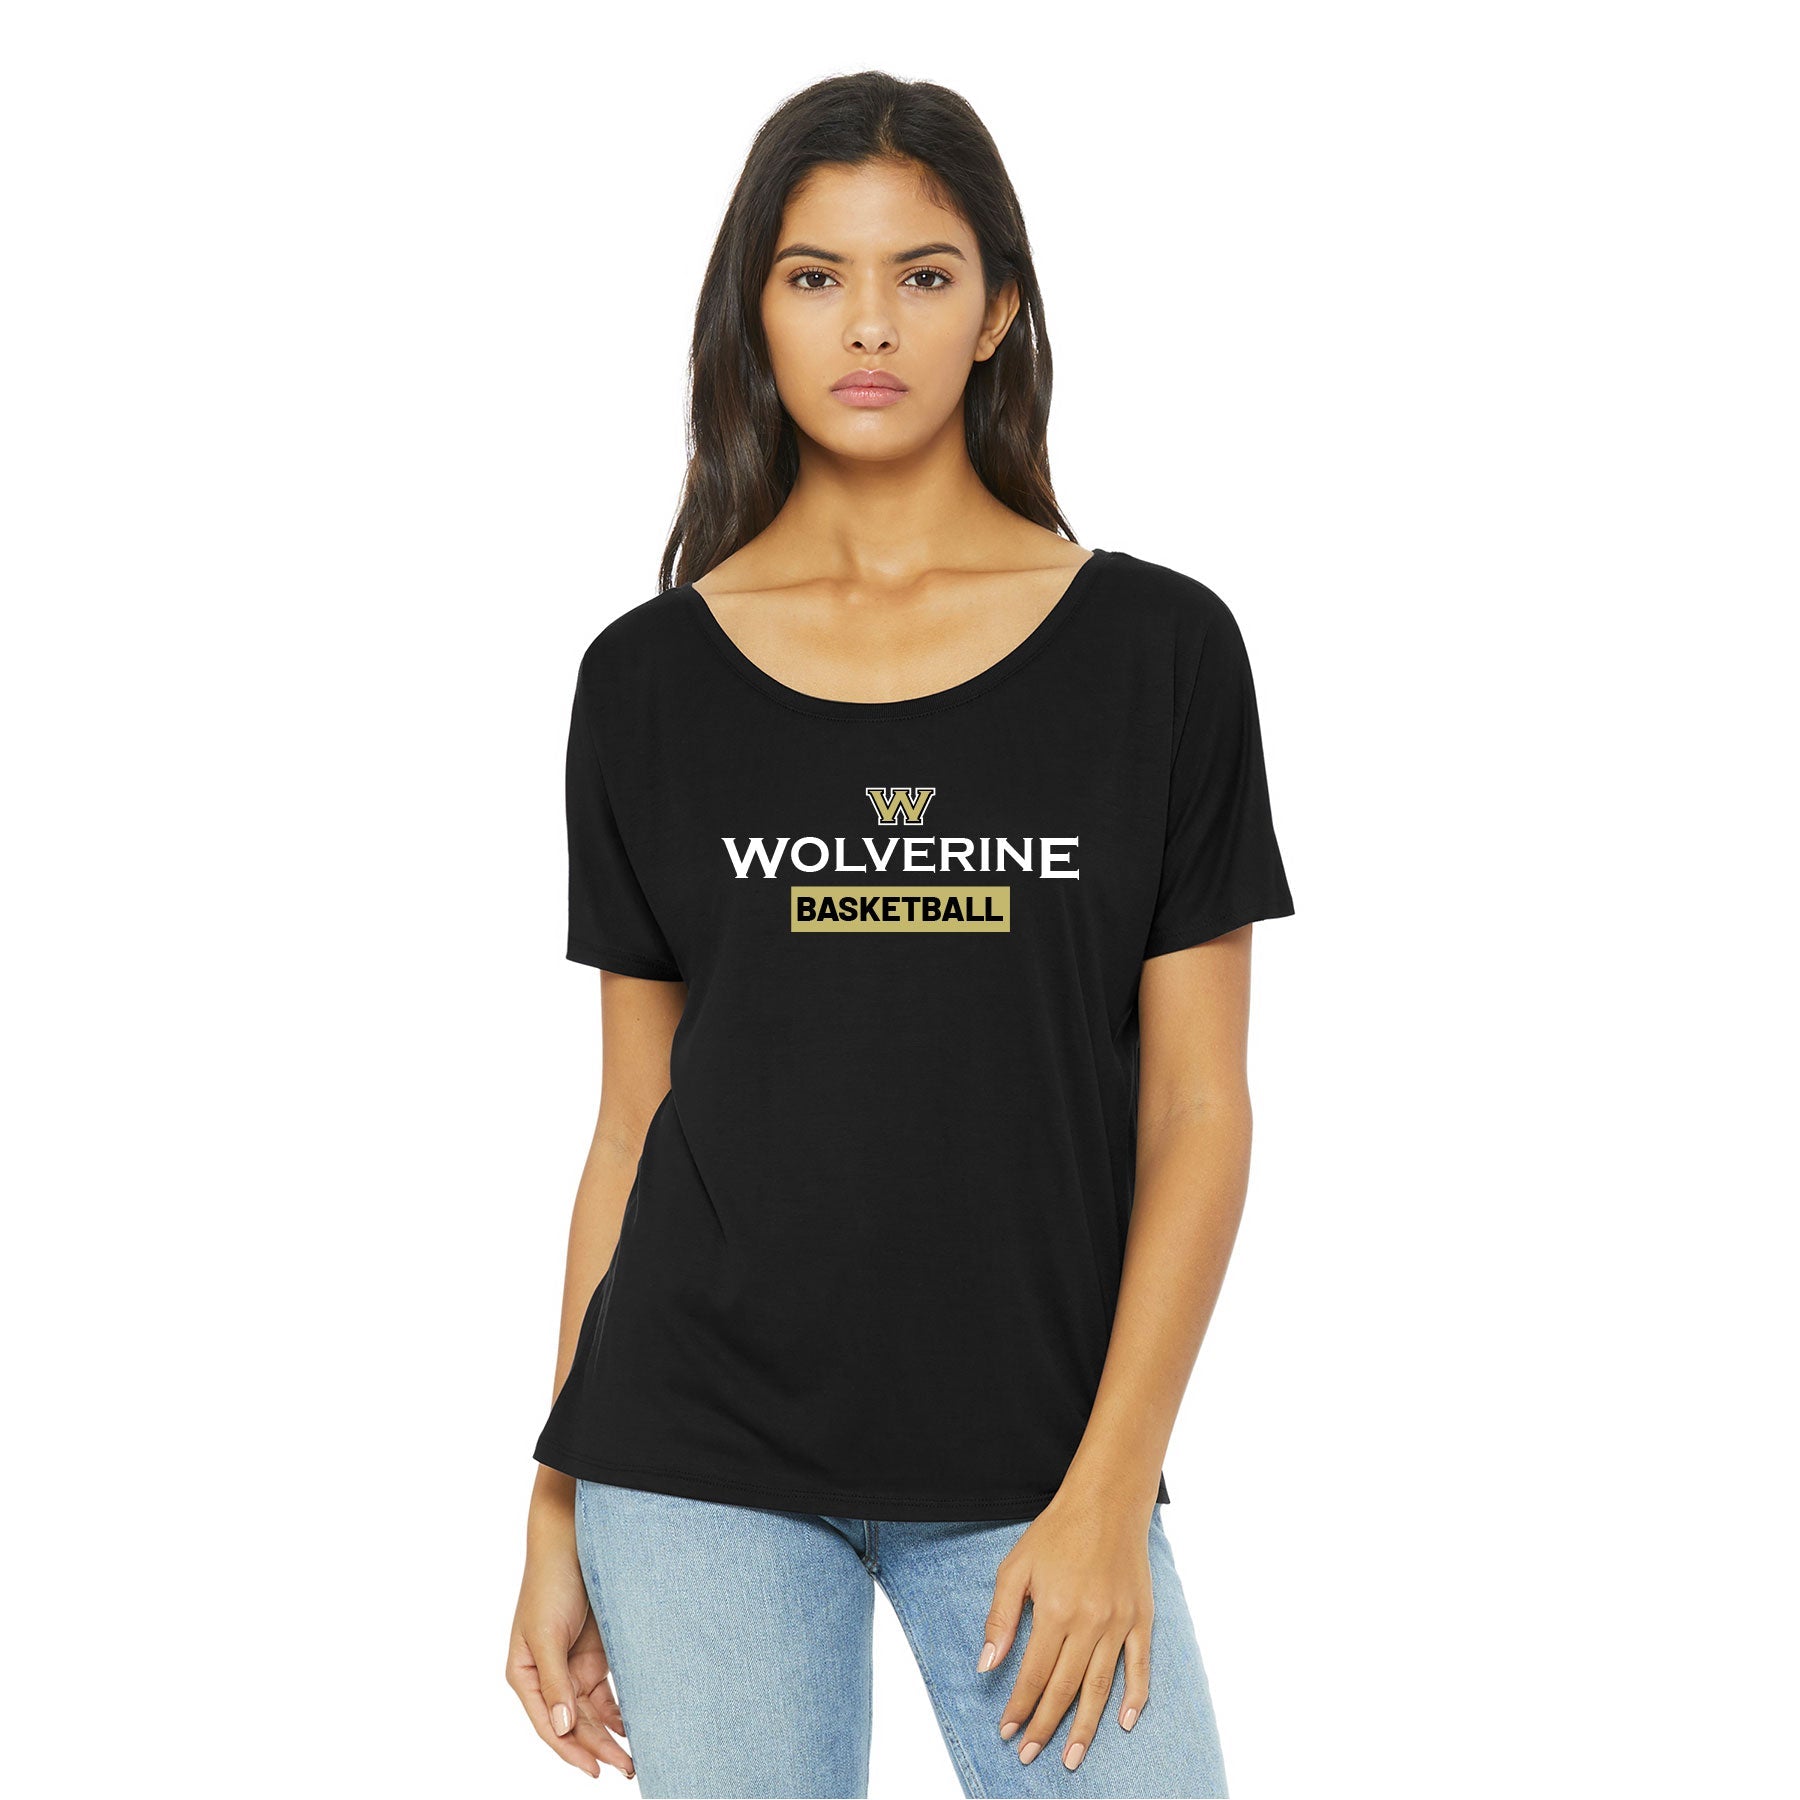 Wolverine Basketball Classic Slouchy Tee